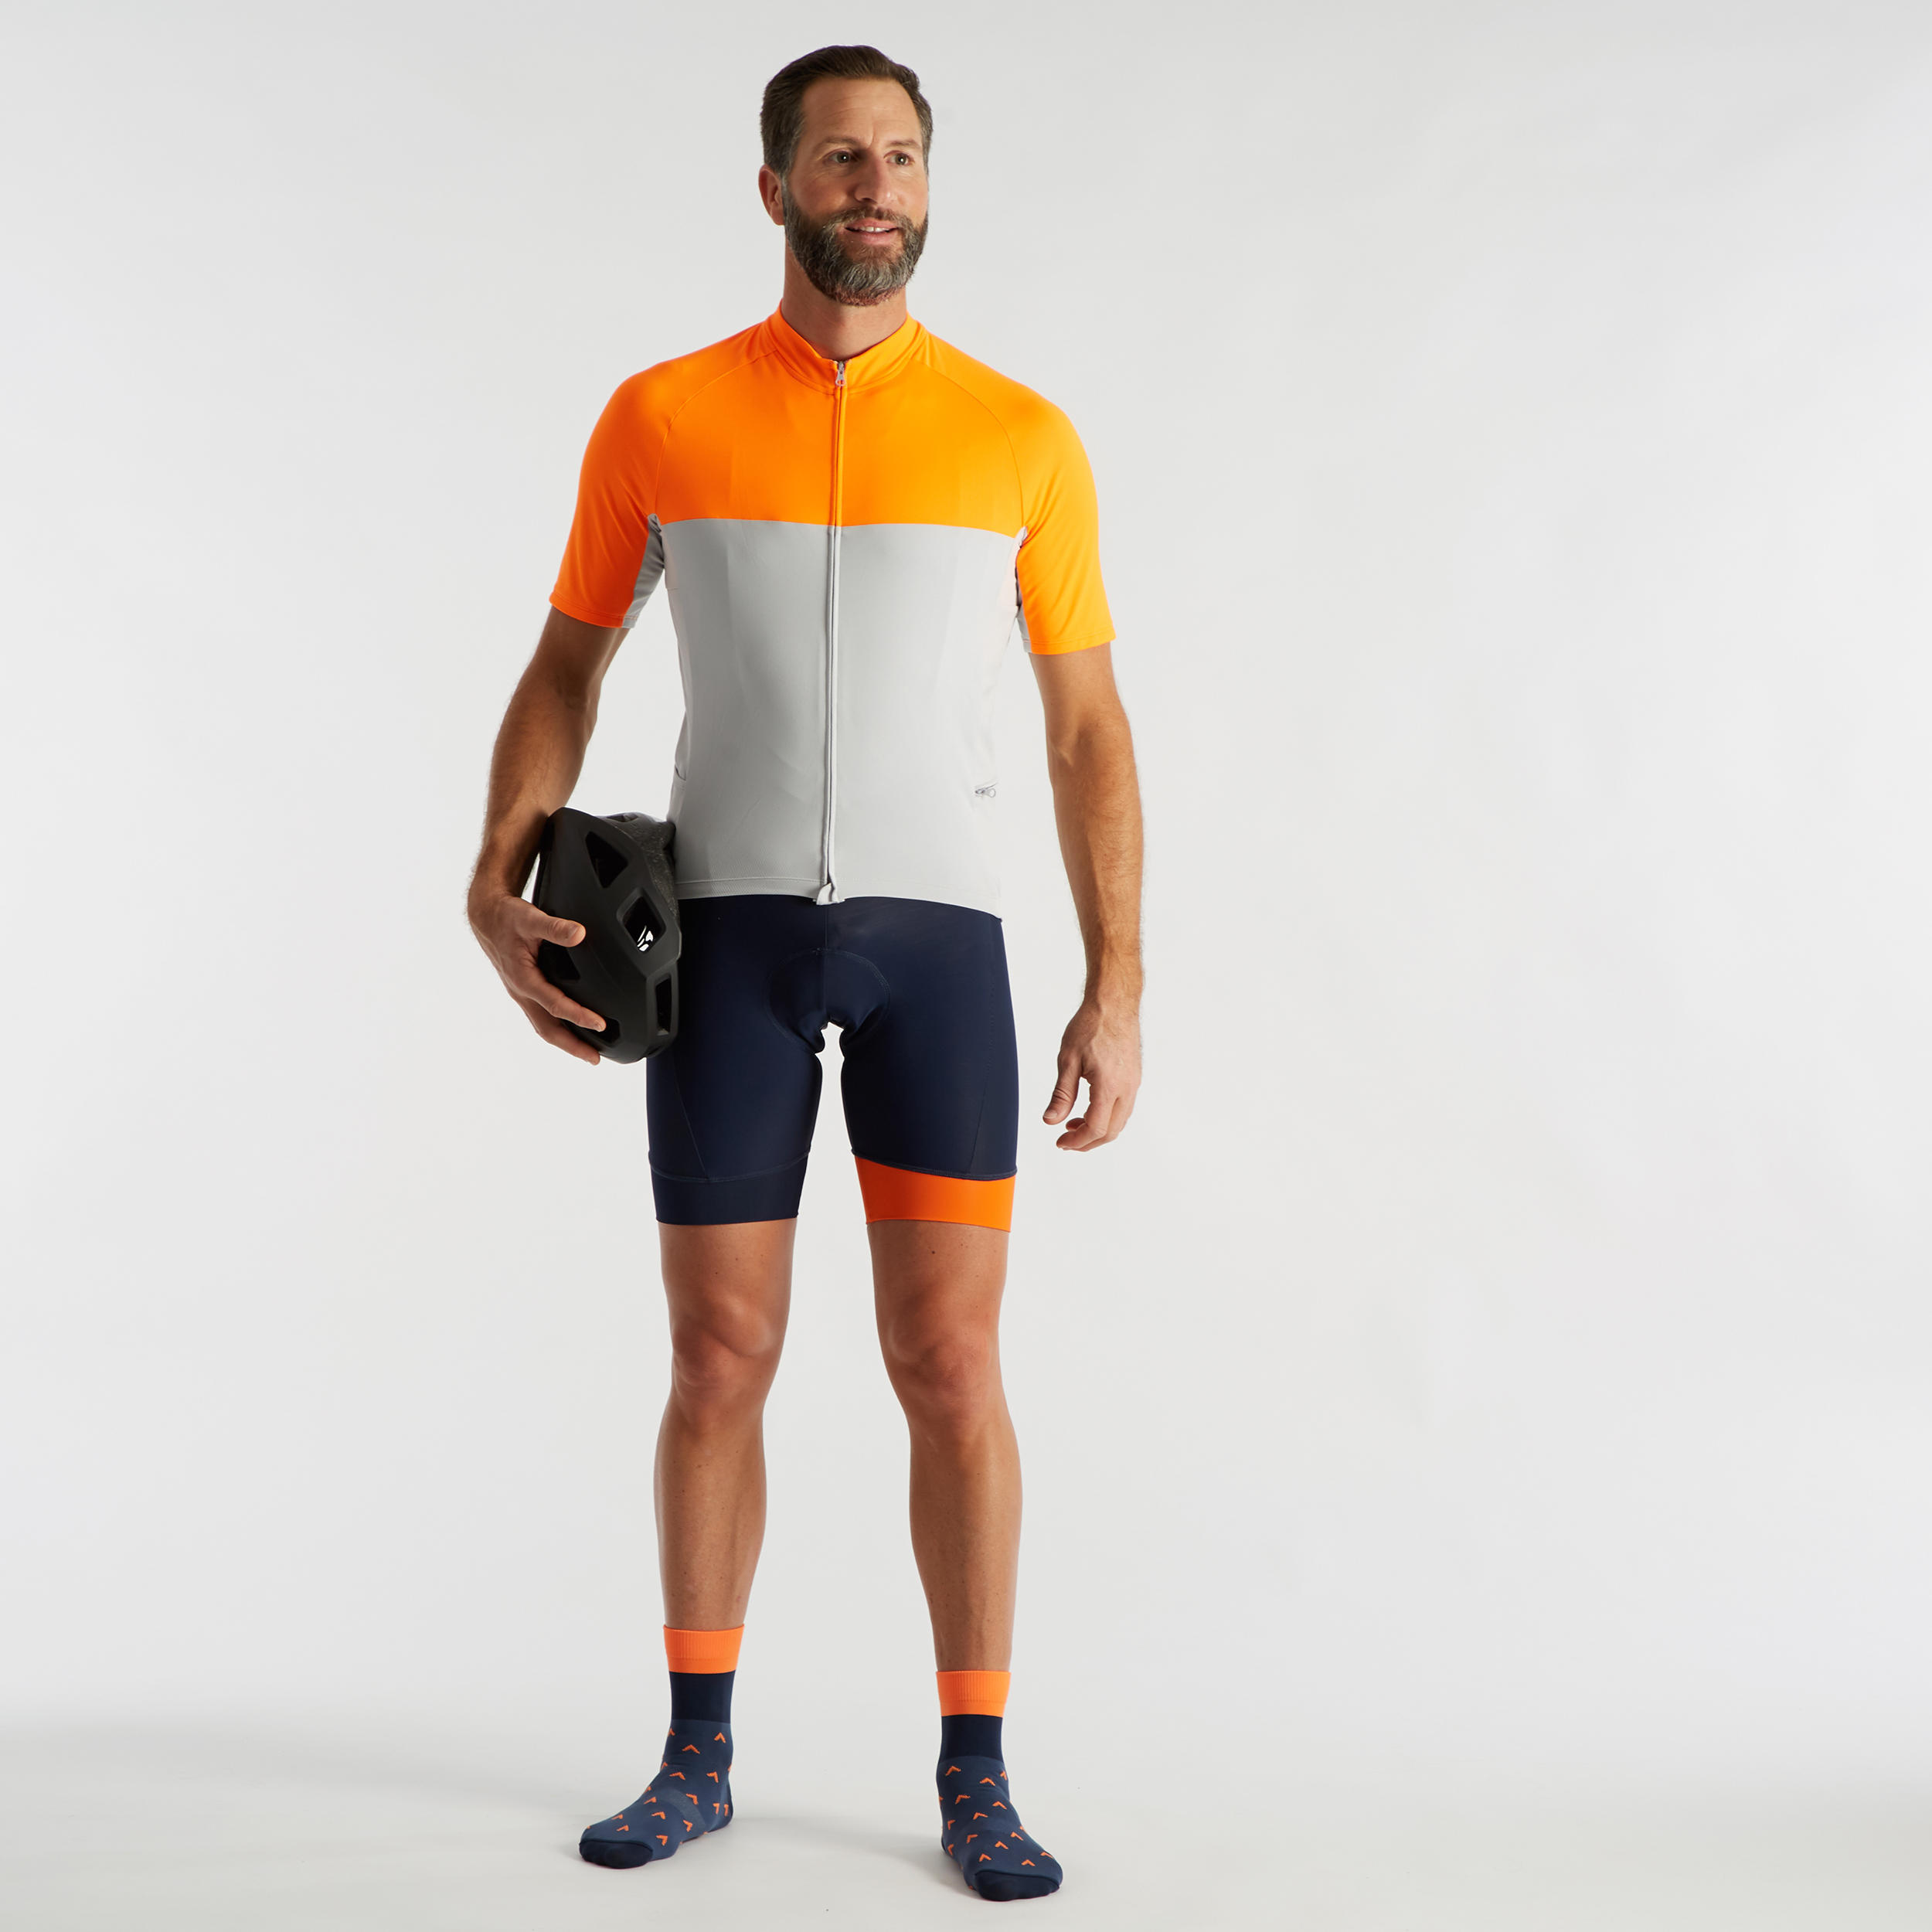 RC100 Short-Sleeved Warm Weather Road Cycling and Touring Jersey - Grey/Orange 3/11